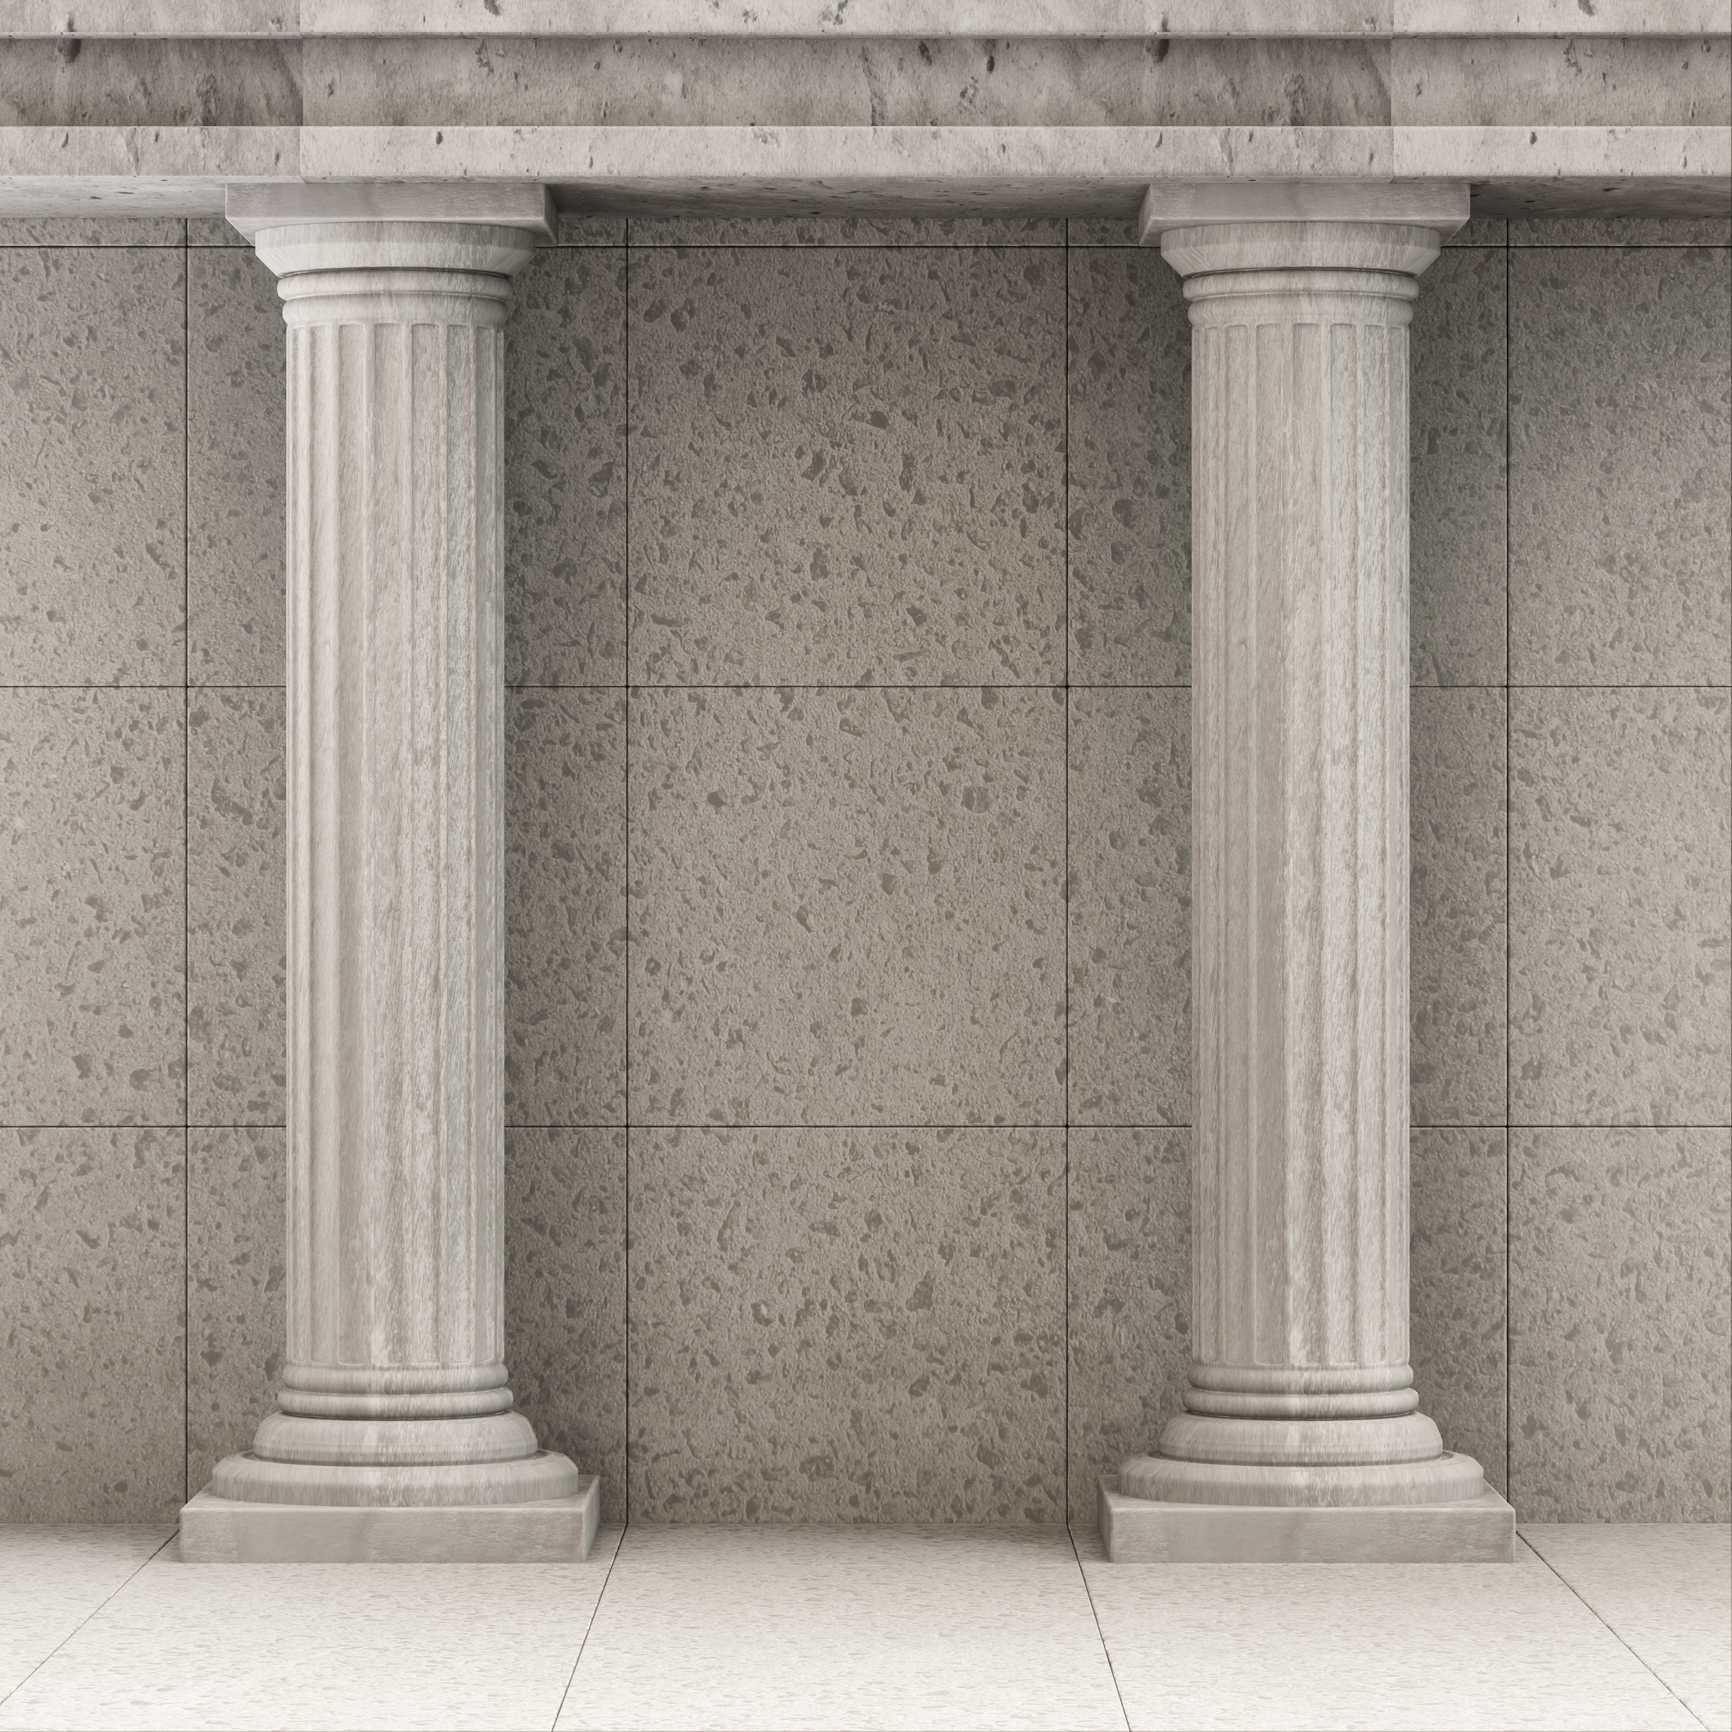 Strong leadership, in the form of granite pillars, is a key leadership quality.